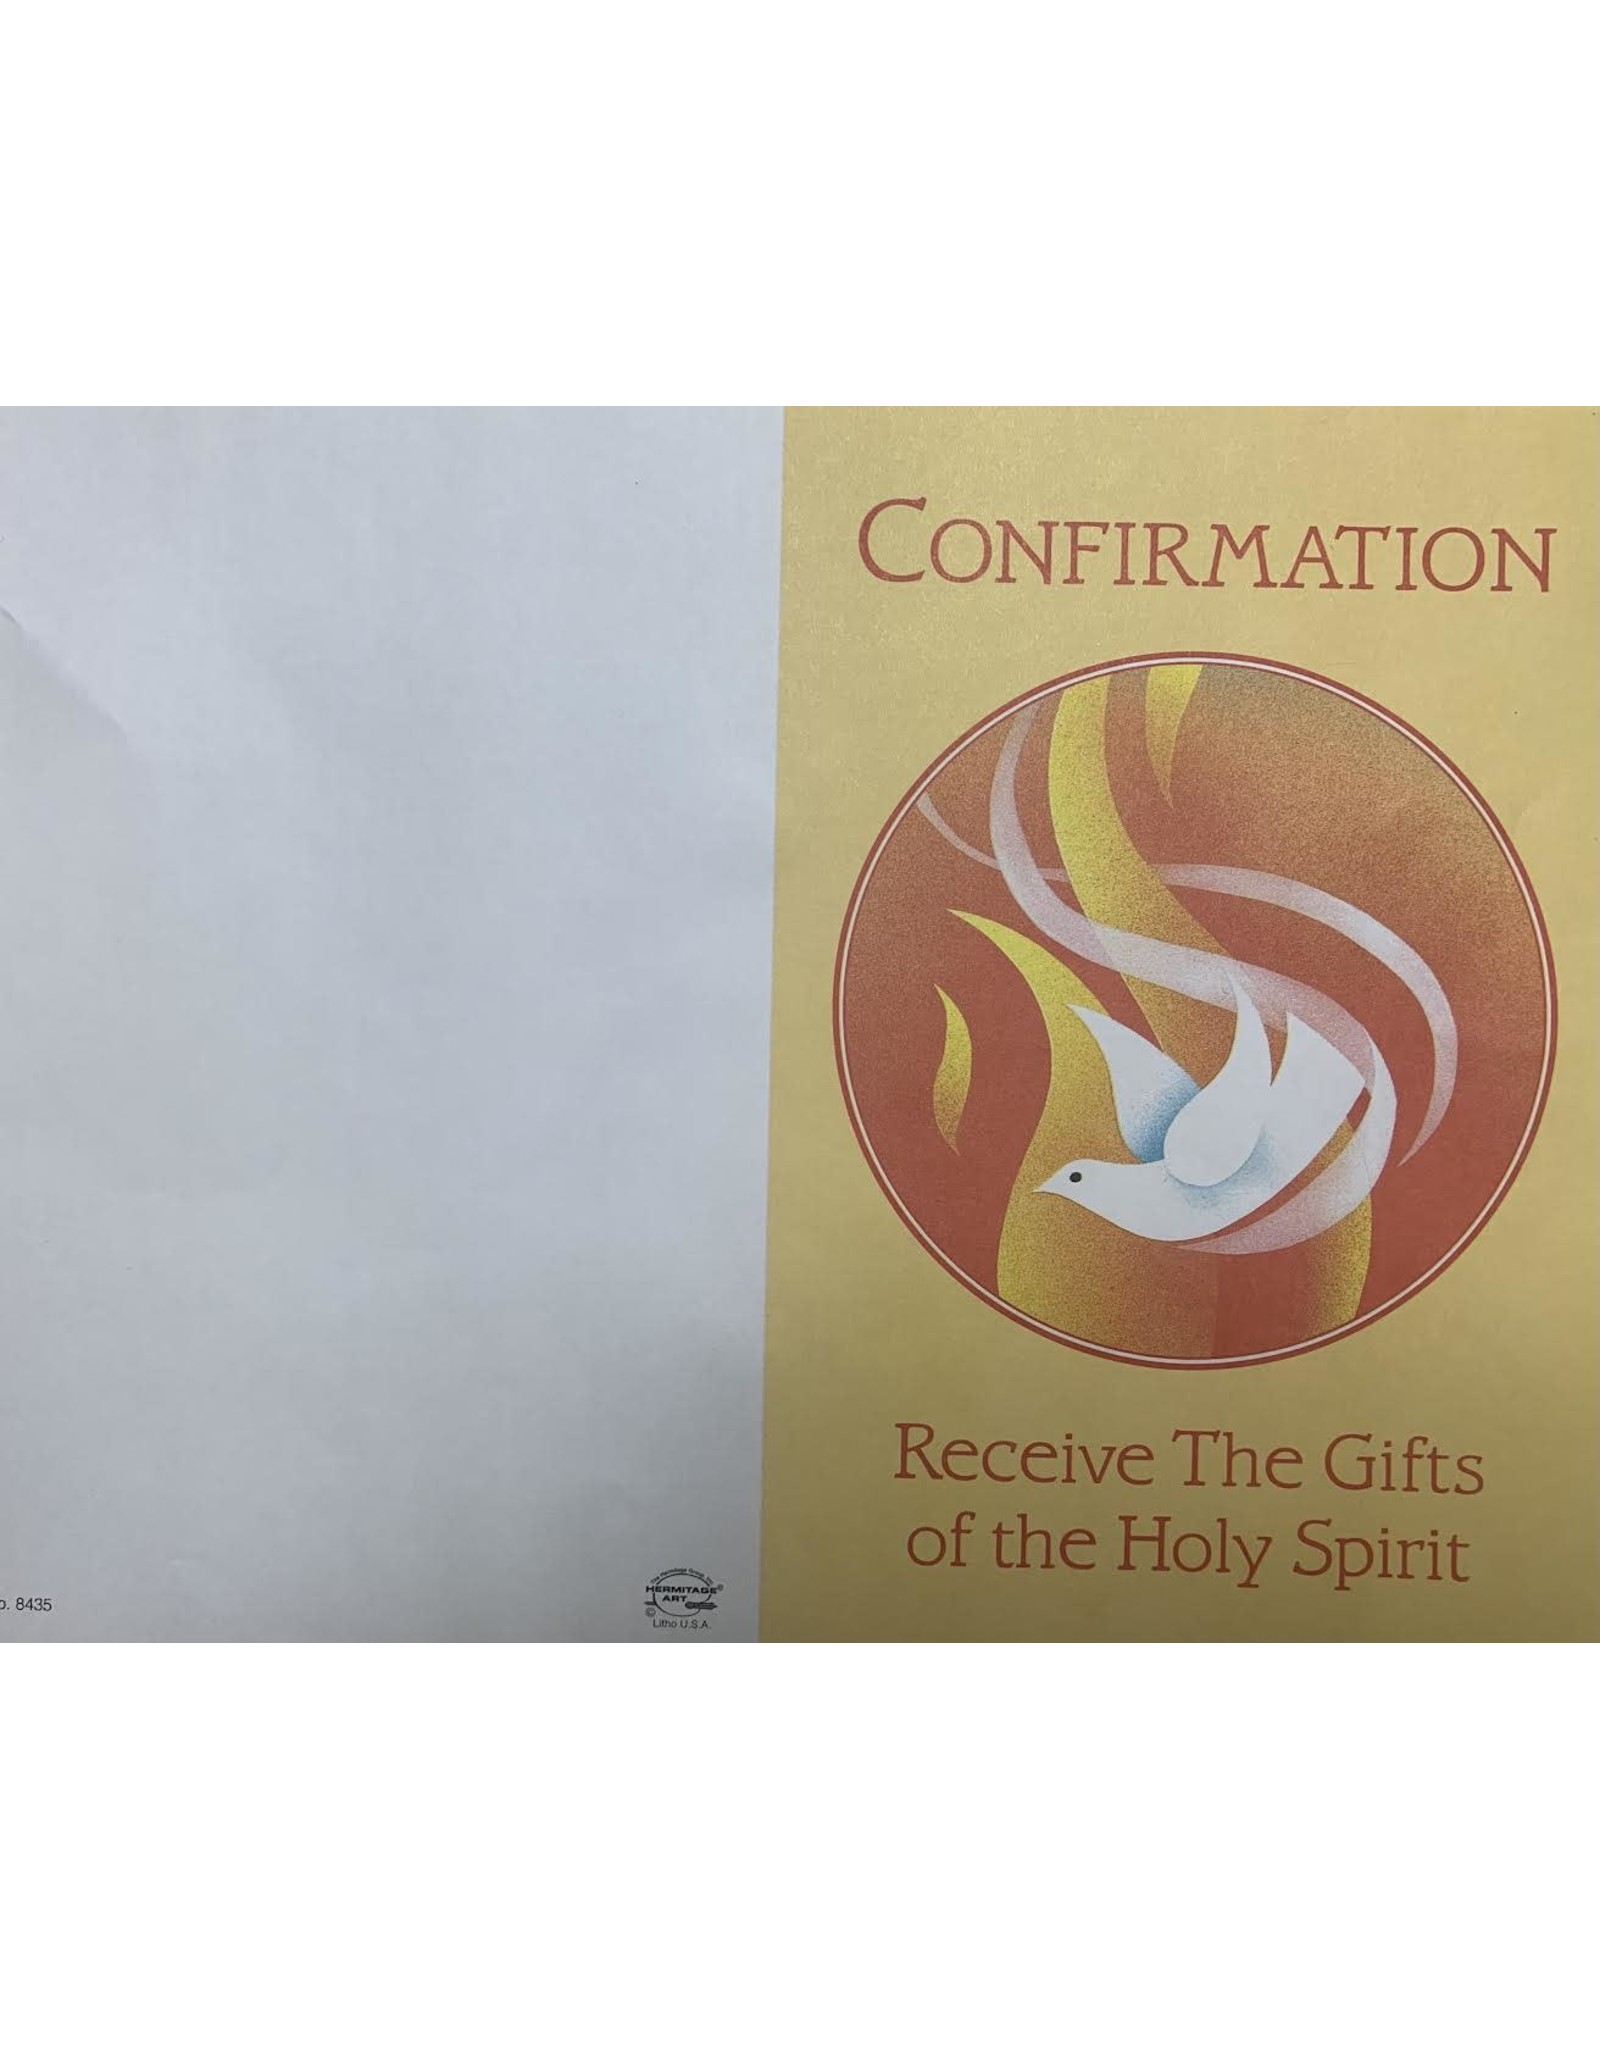 Bulletins - Confirmation, Receive the Gifts (100)